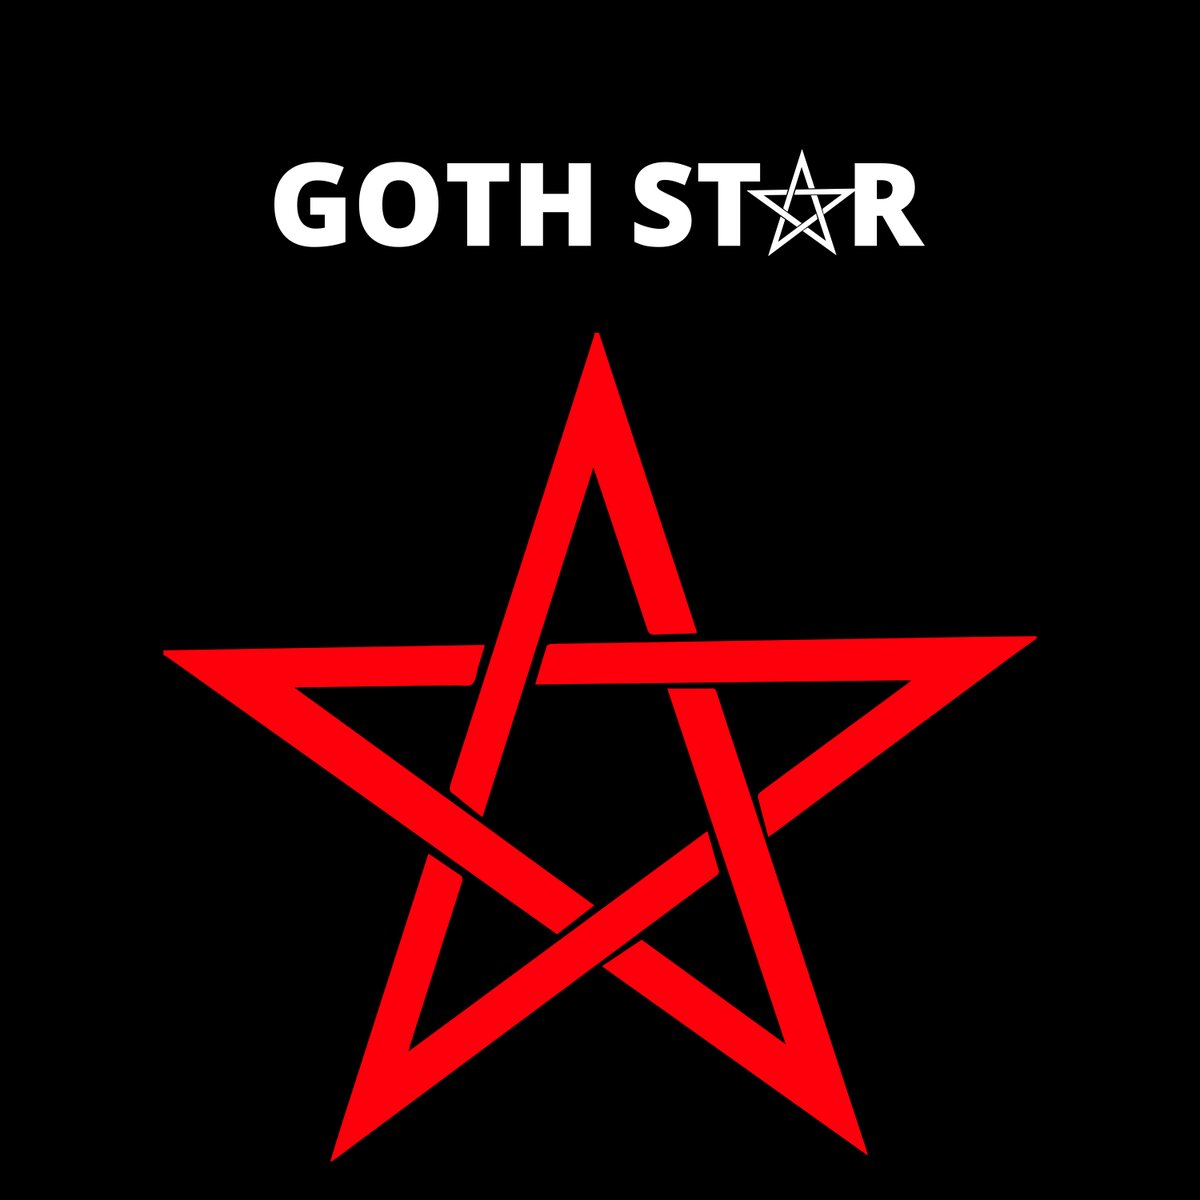 New debut single out today by our friends Goth Star Check it out👏👏 ➡️ open.spotify.com/album/70rasOmh…